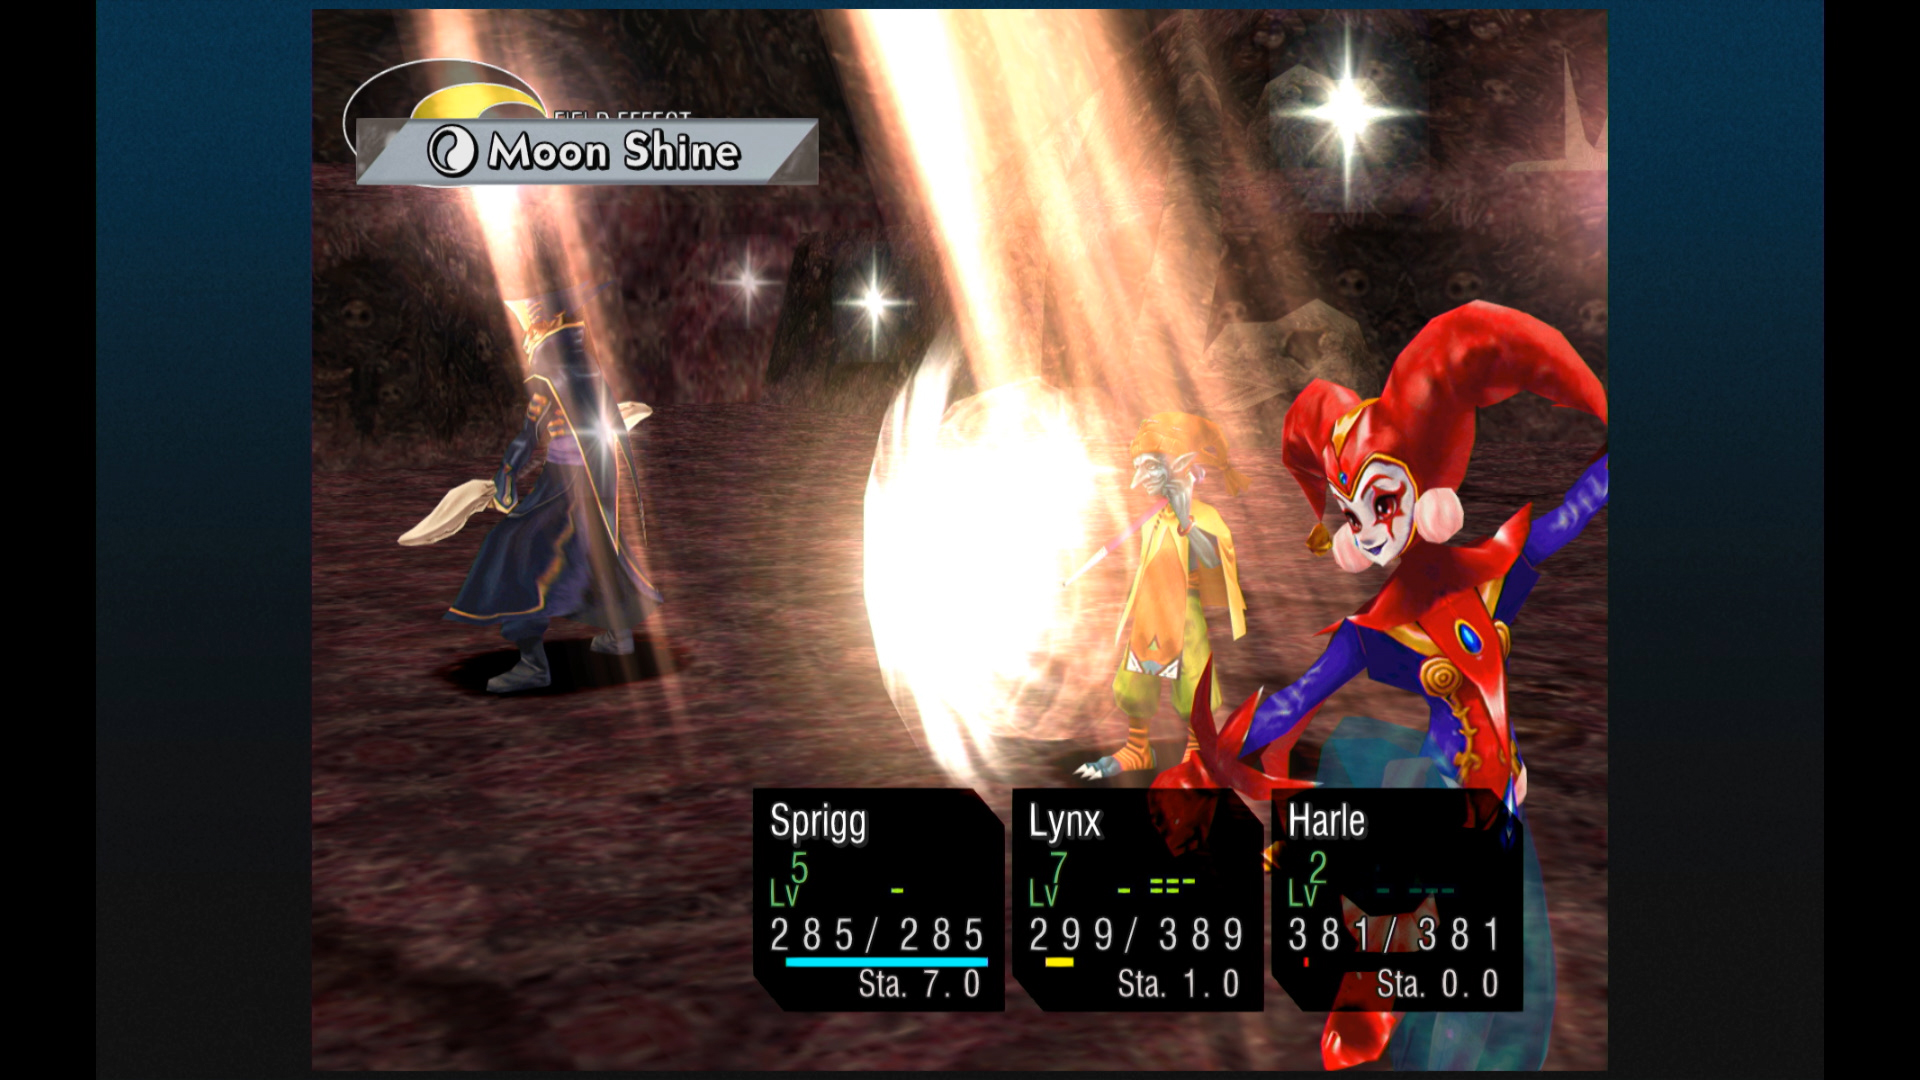 Steam Community :: Guide :: Chrono Cross: Characters